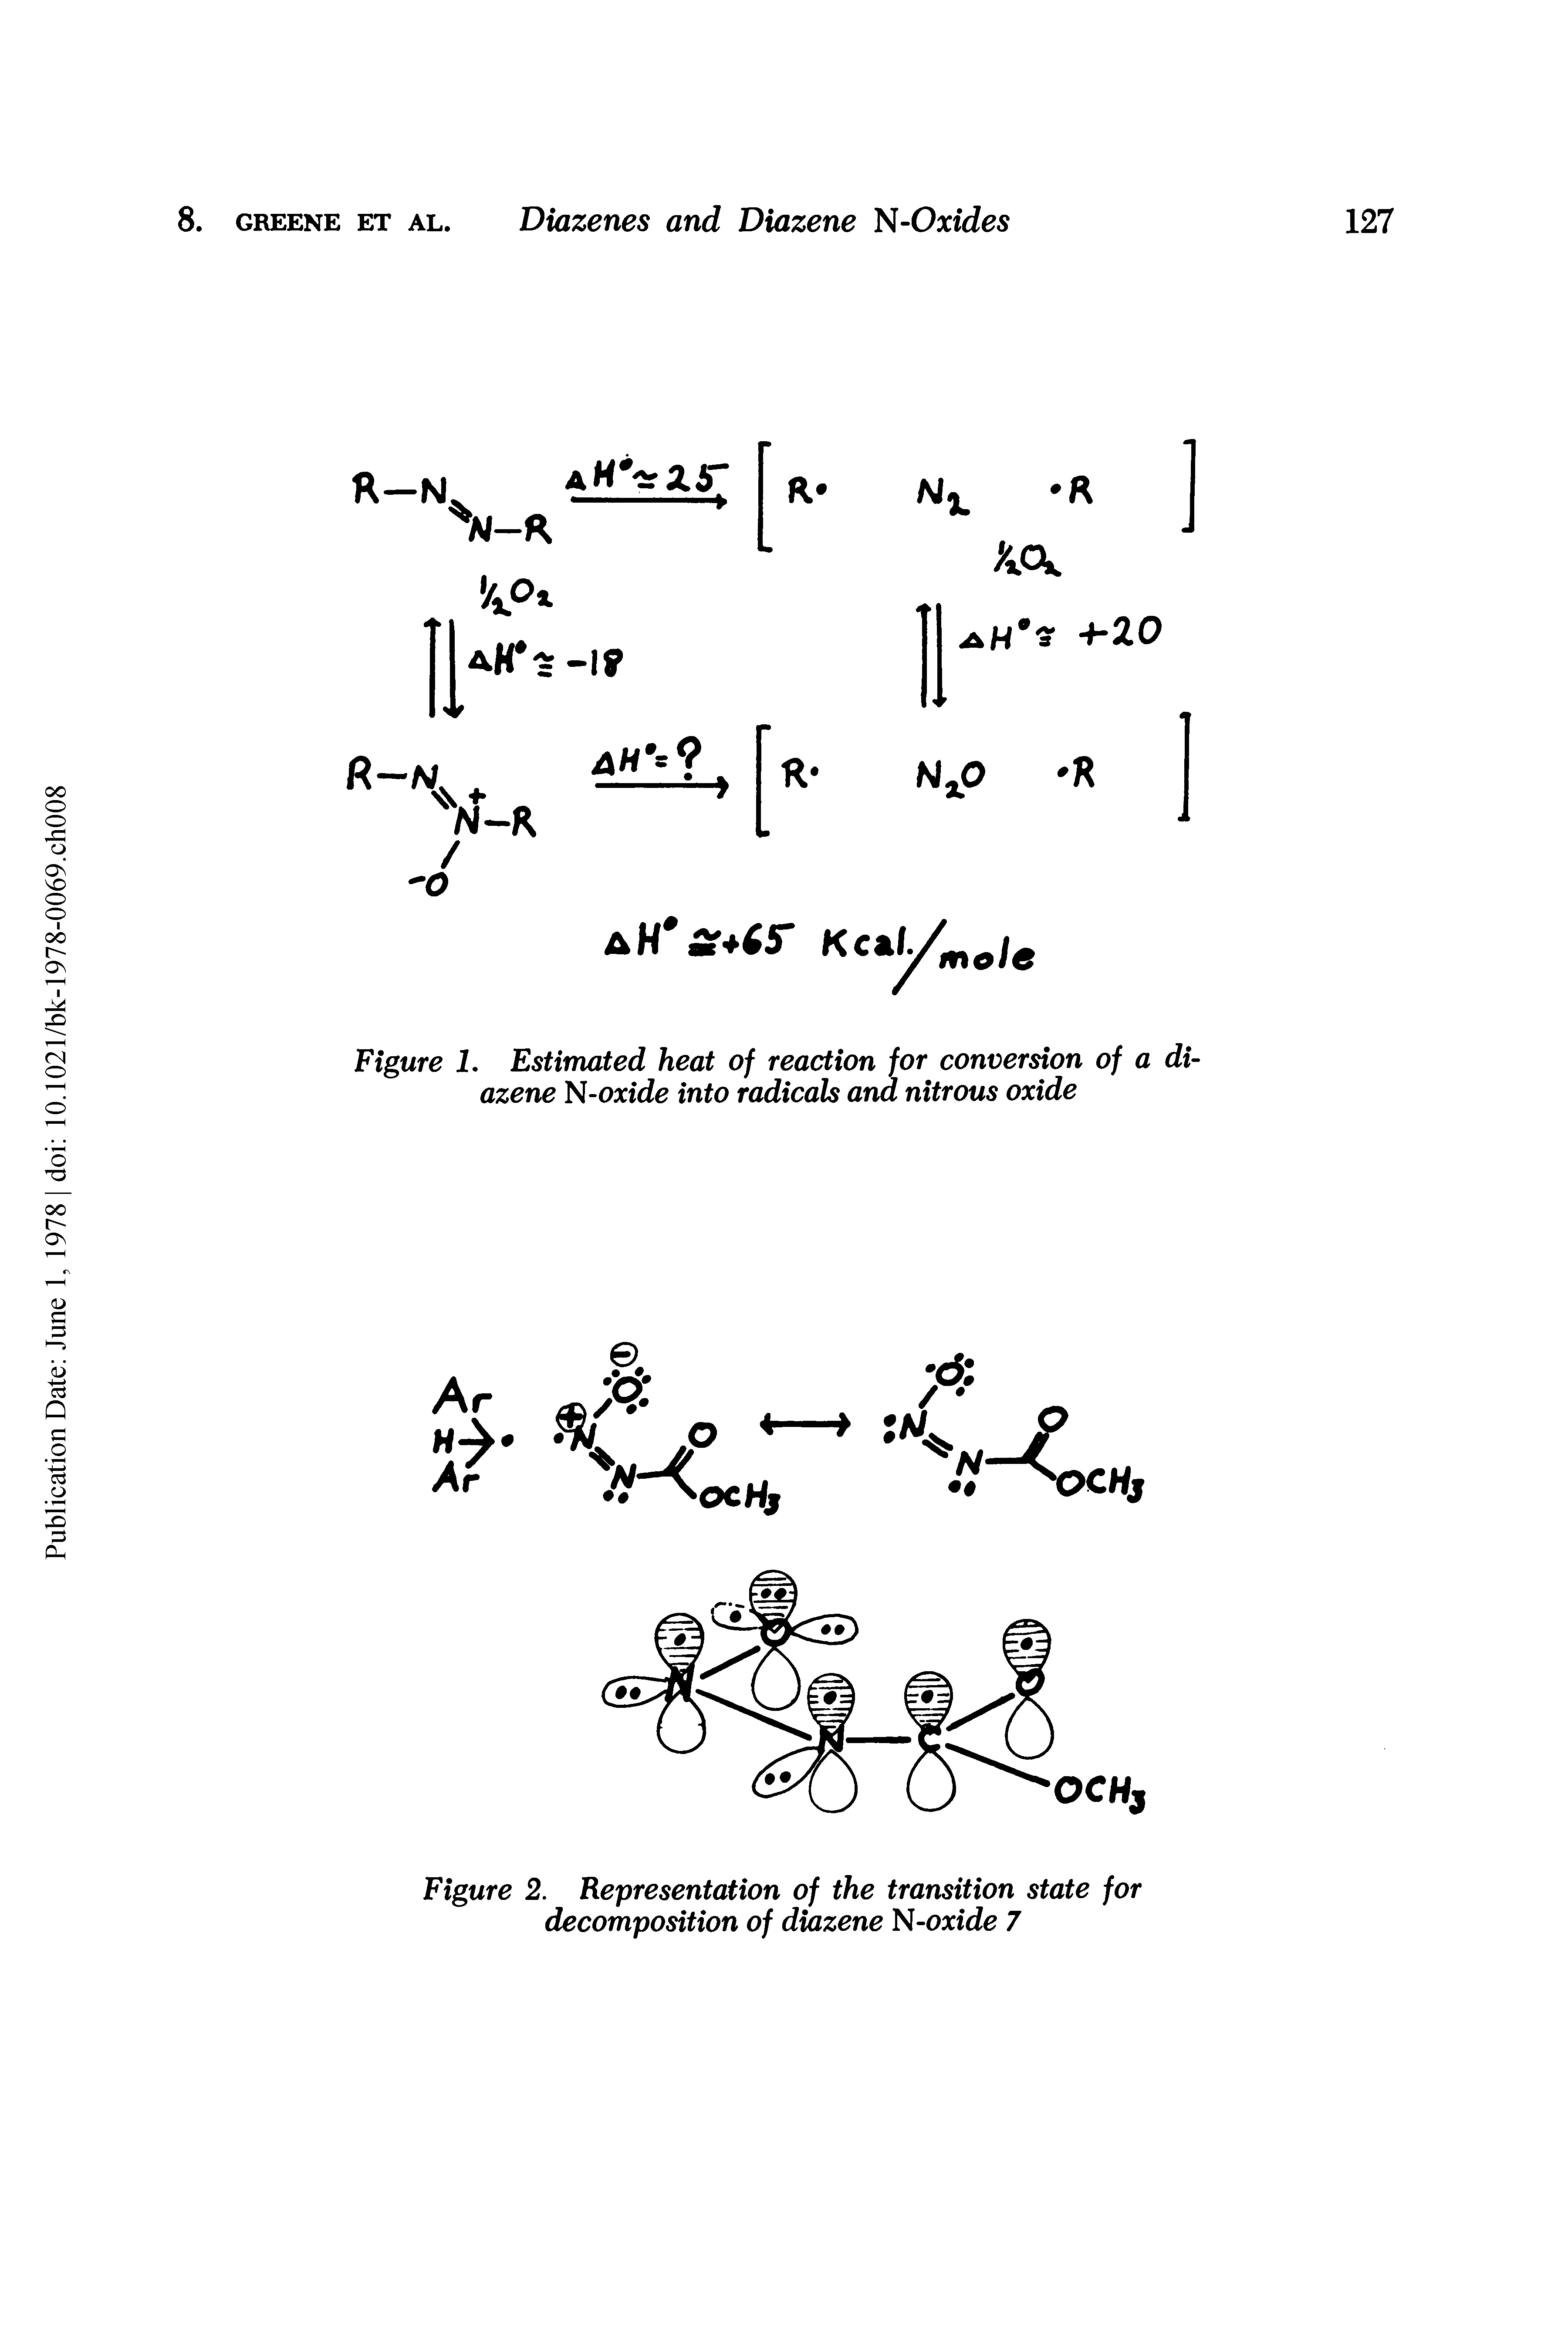 Figure 2. Representation of the transition state for decomposition of diazene N-oxide 7...